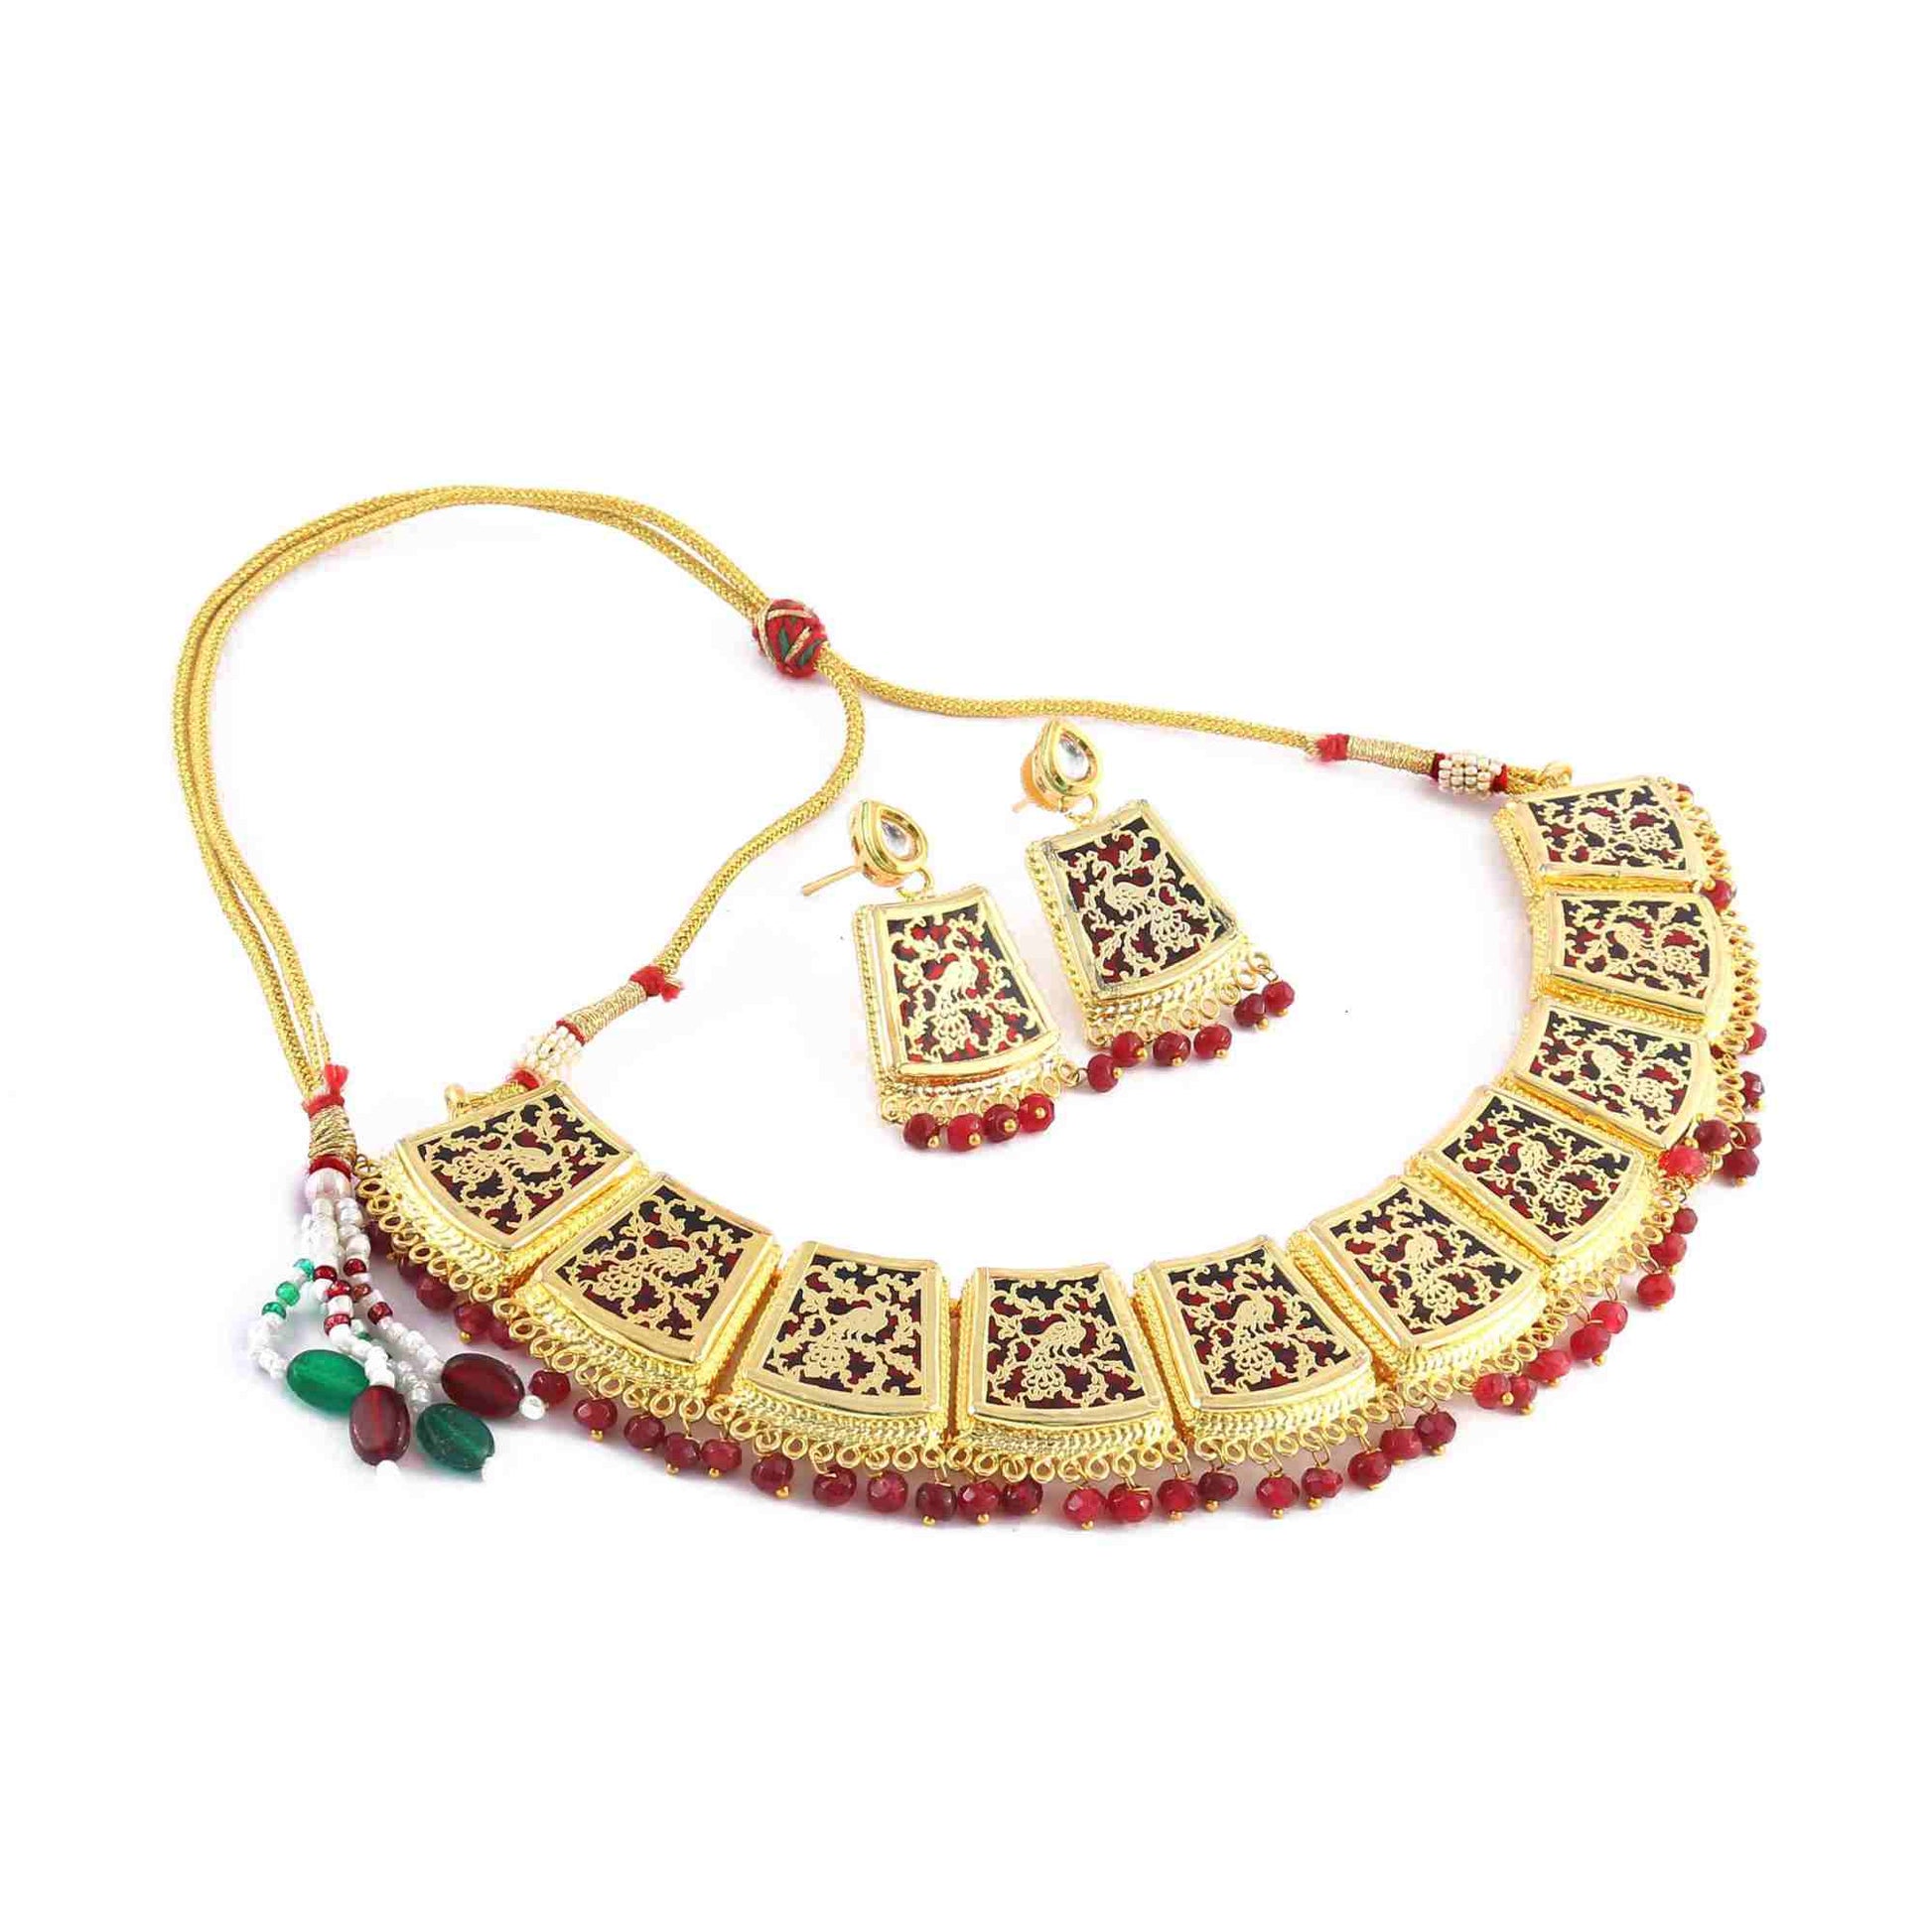 Thewa Short Choker Necklace with Earrings